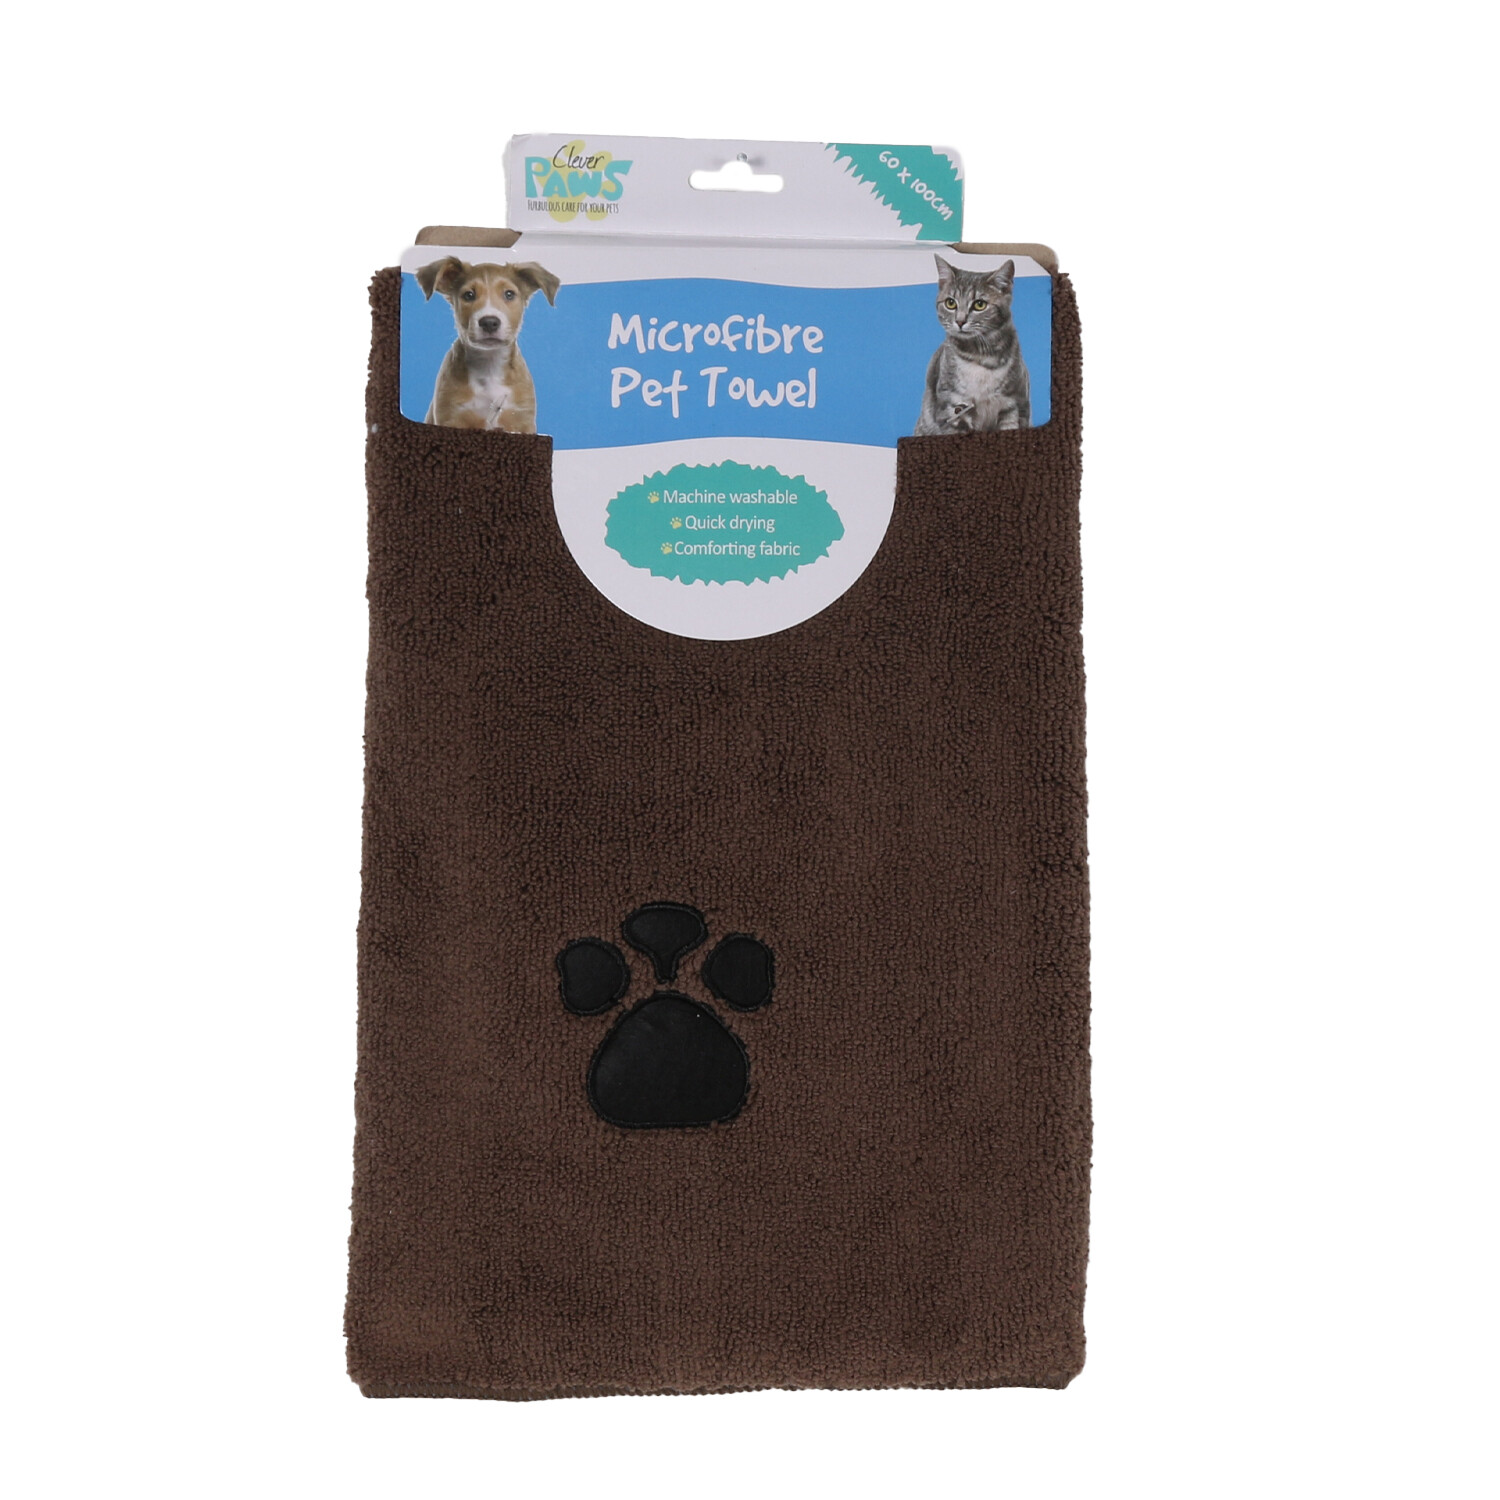 Single Clever Paws Microfibre Pet Towel in Assorted styles Image 2